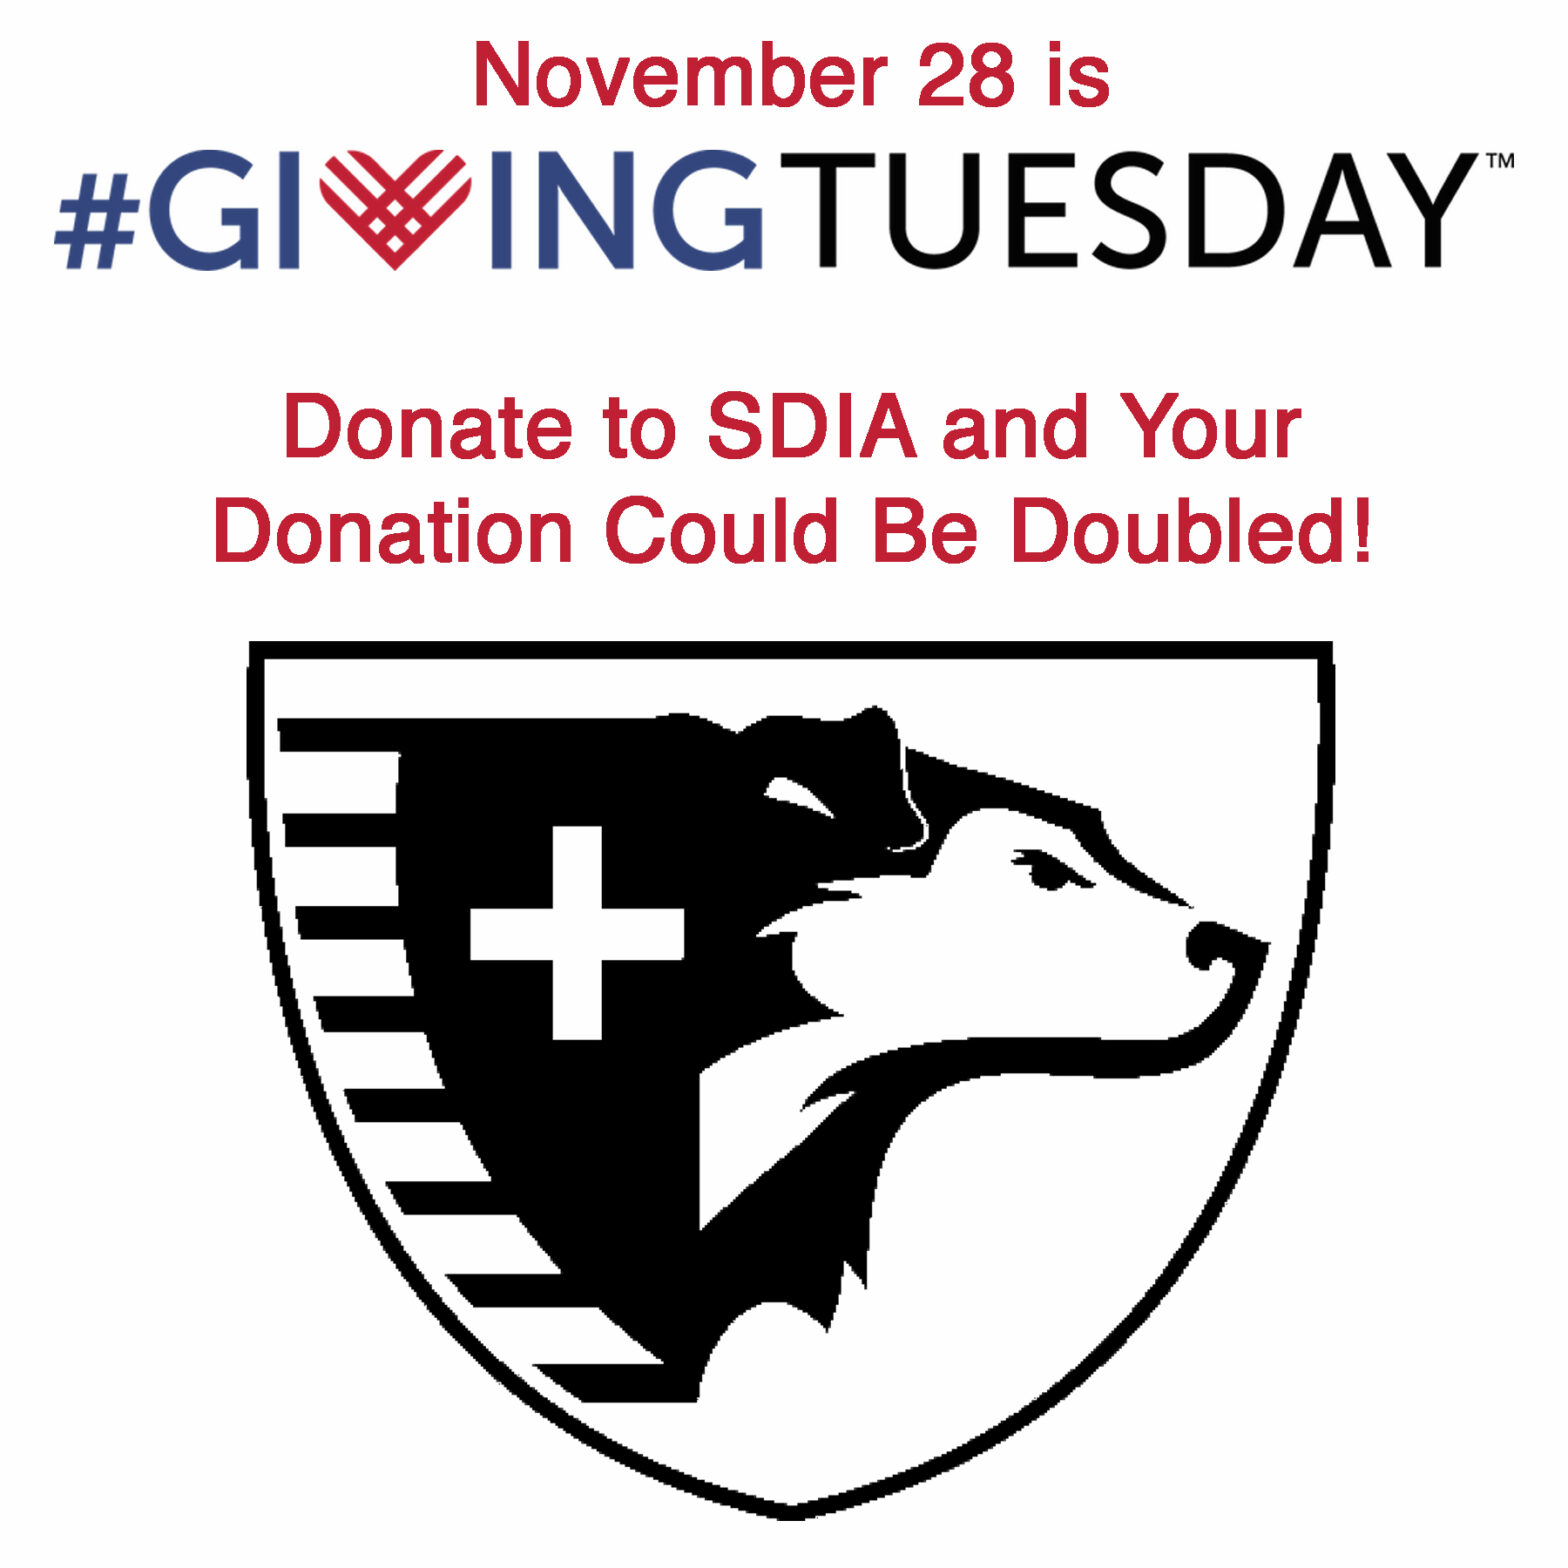 Give to SDIA on #GivingTuesday and Your Donation Could Be Doubled!